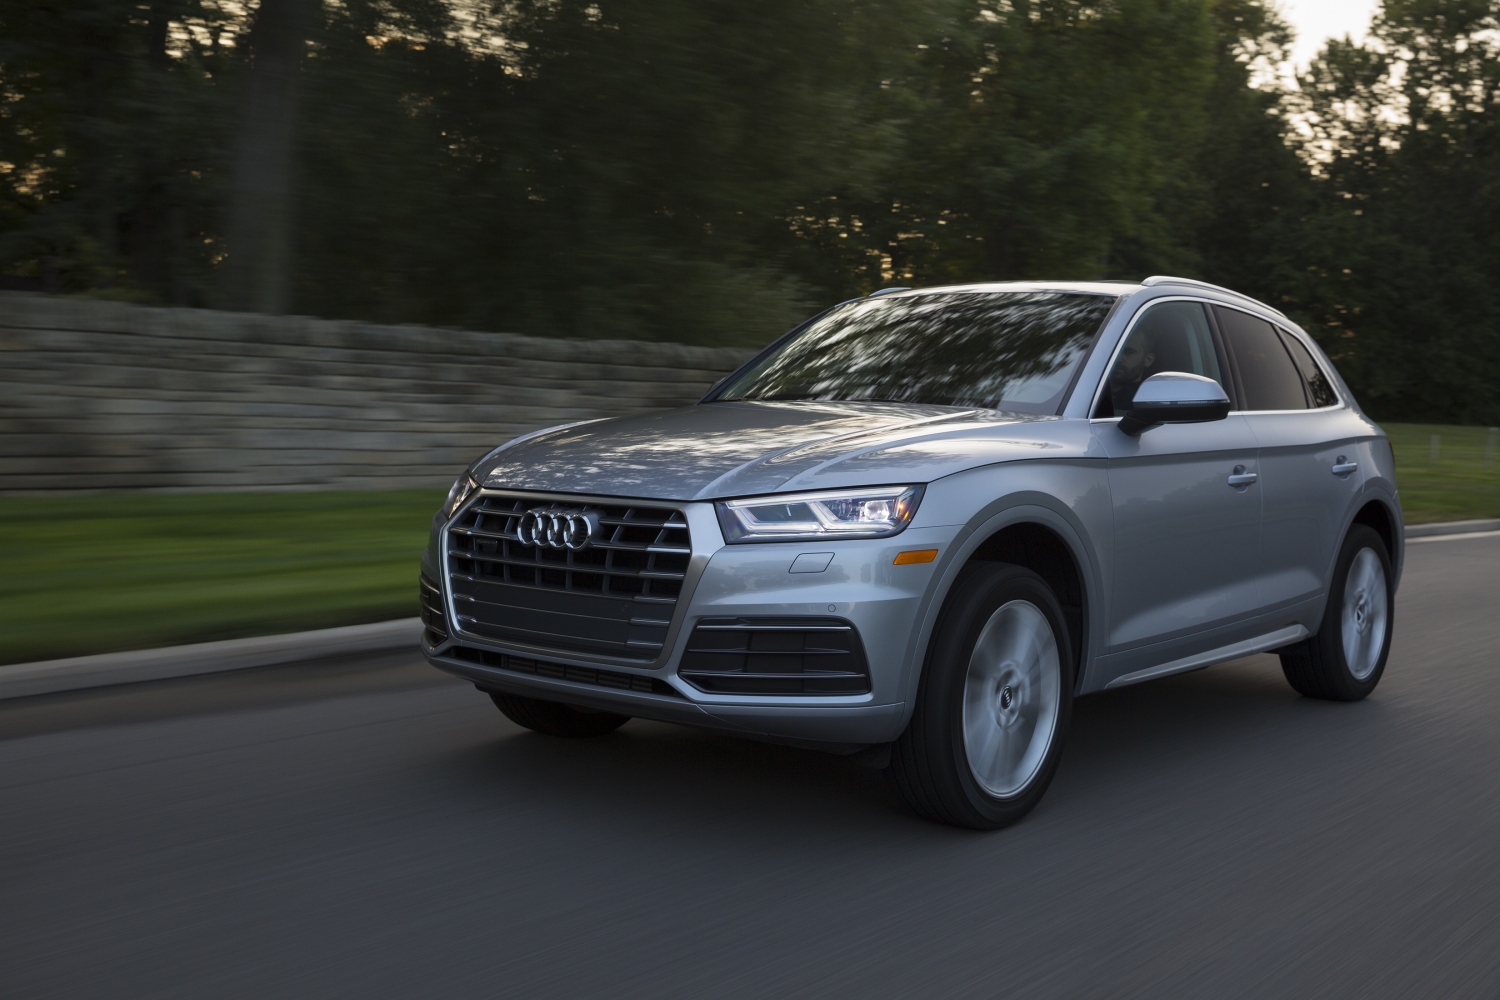 Just How High Tech is the Audi Q5?